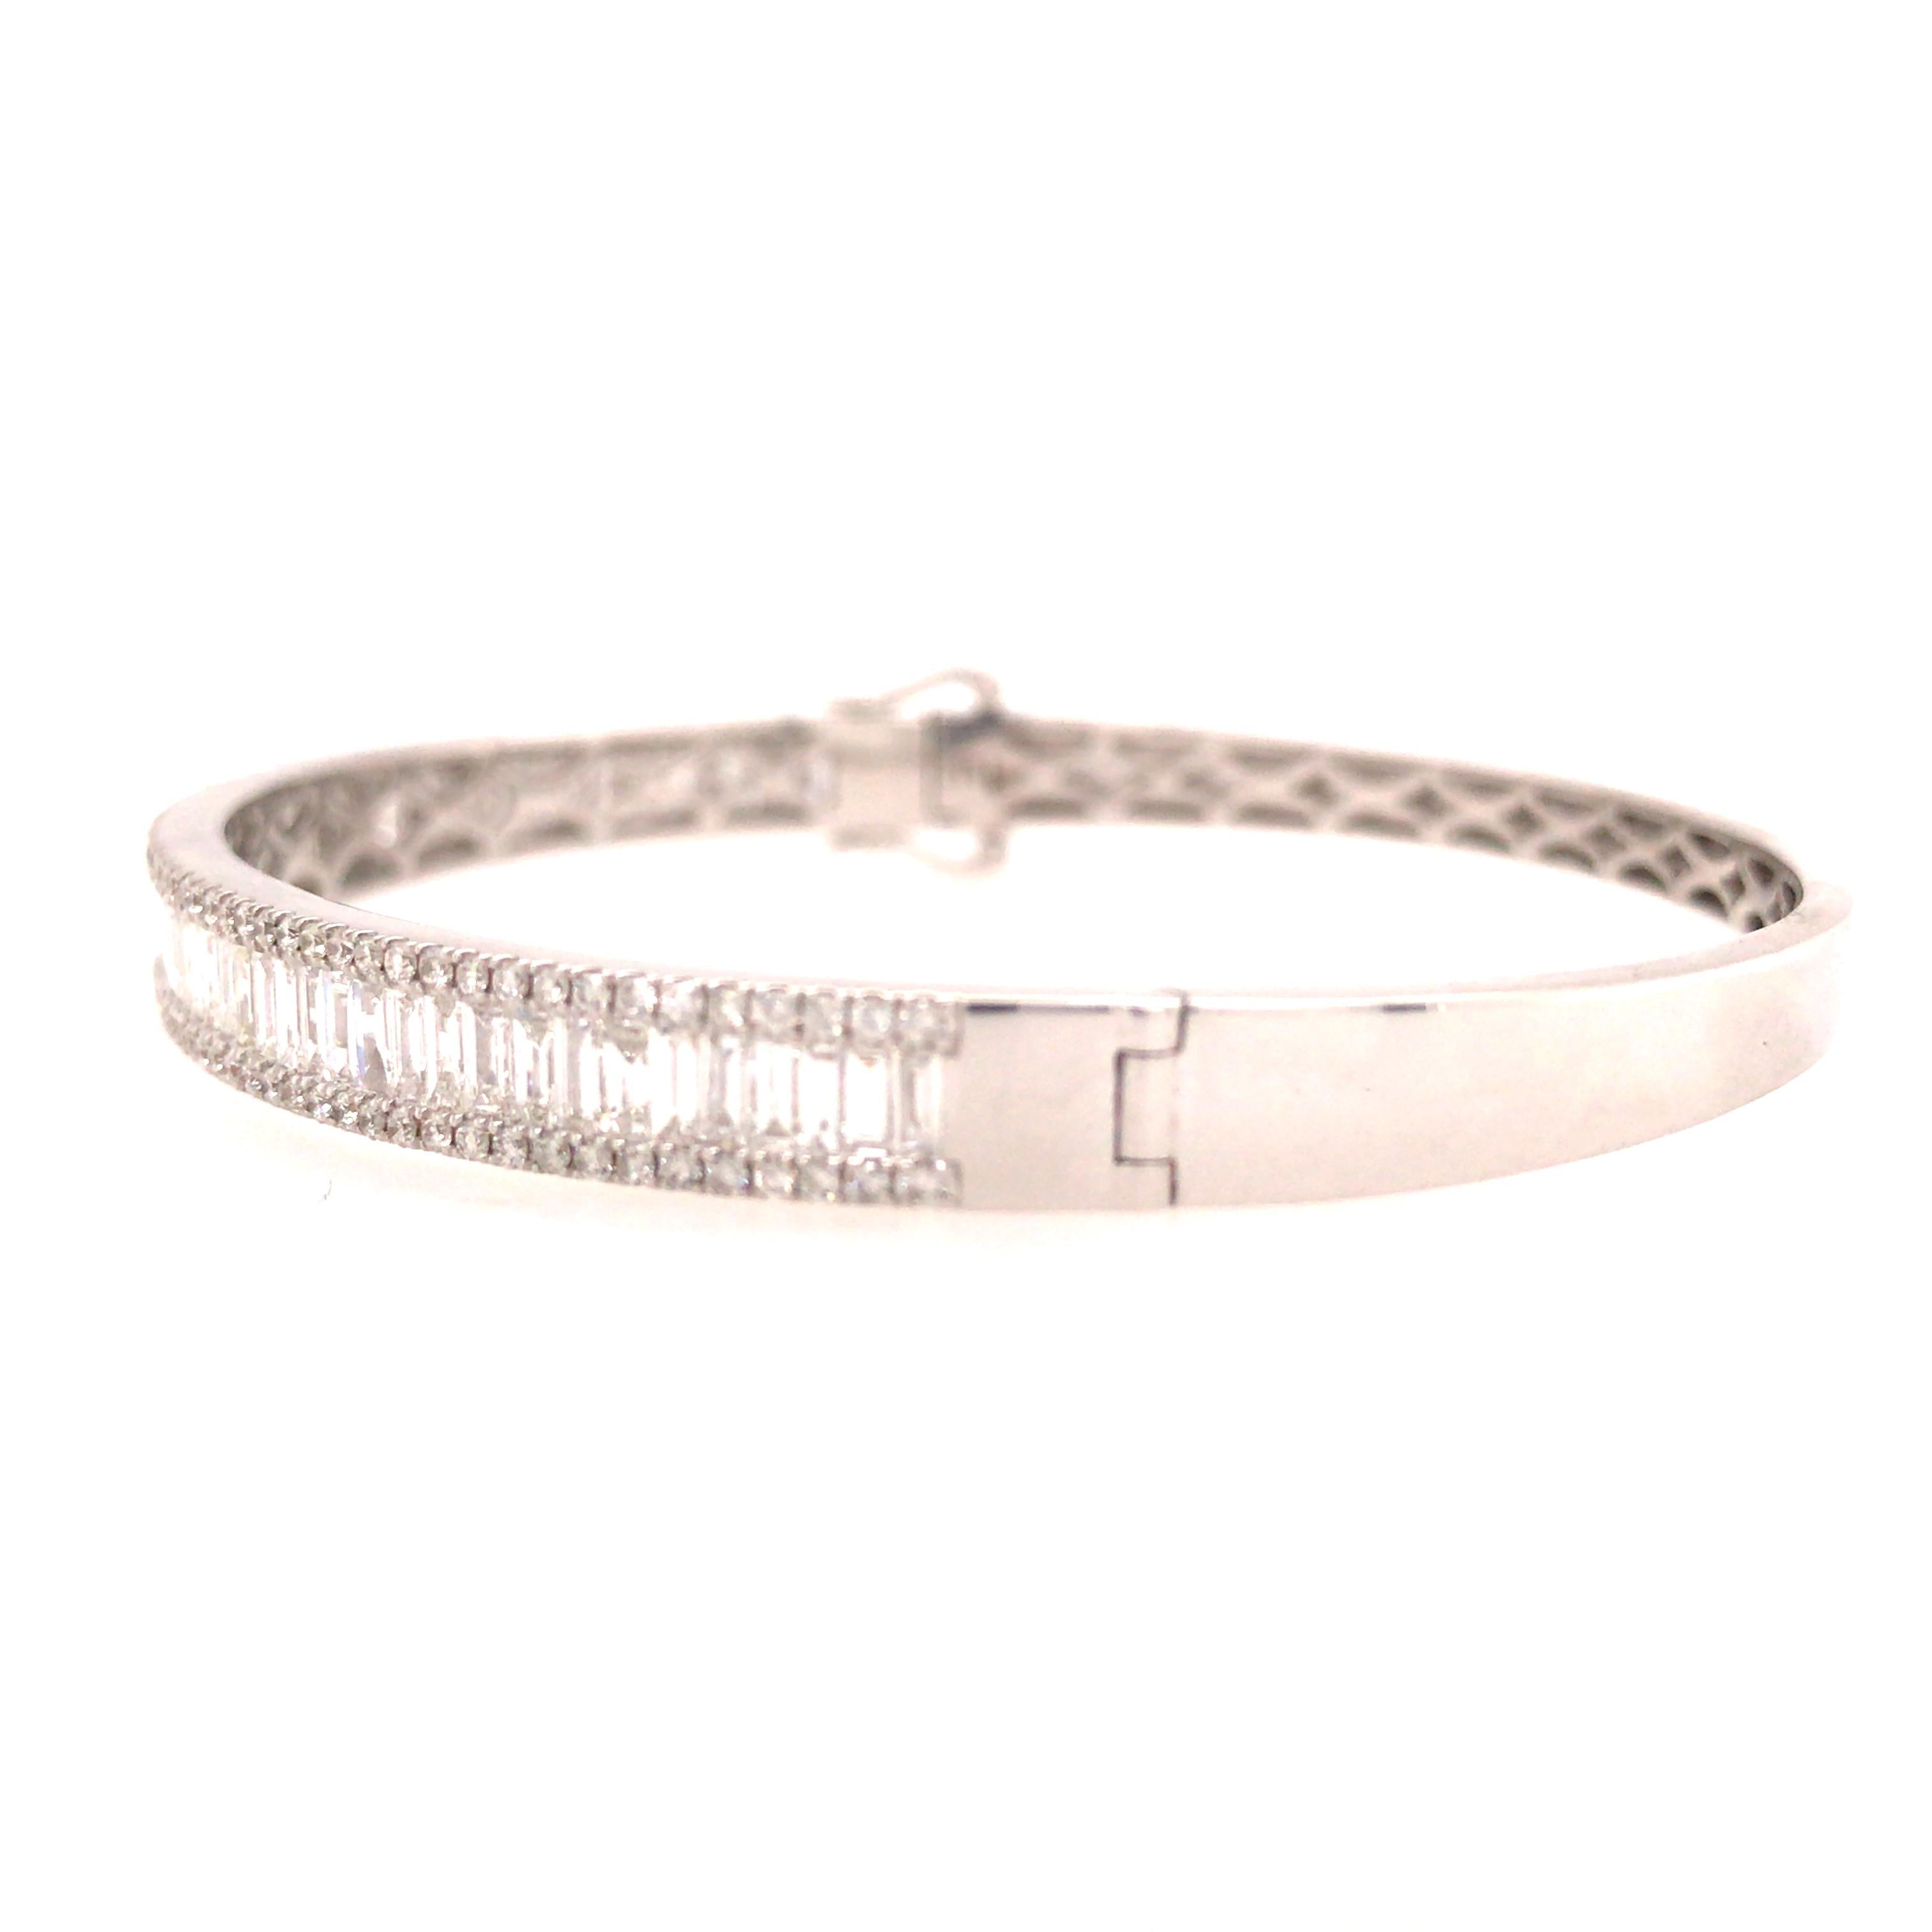 Round and Baguette Diamond Bangle in 18K White Gold.  Round Brilliant Cut and Baguette Diamonds weighing 2.75 carat total weight, G-H in color and VS-SI in clarity are expertly set.  The Bangle measures 6 1/2 inch and 1/4 inch in width.  14.8 grams.